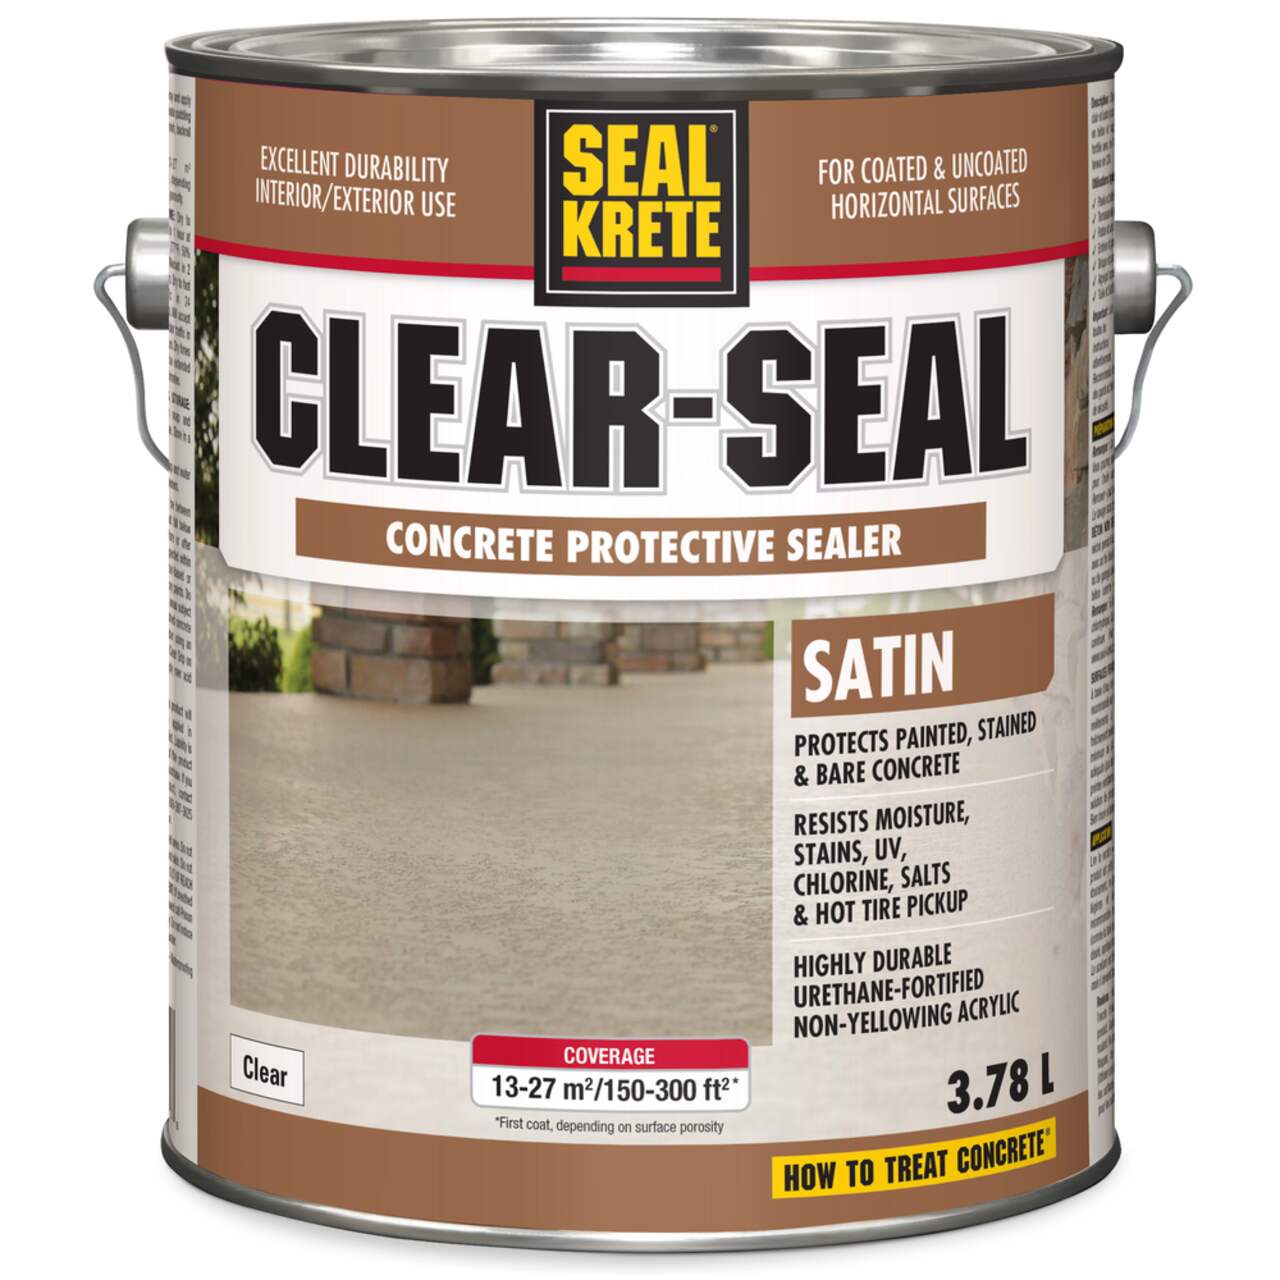 https://media-www.canadiantire.ca/product/fixing/paint/surface-prep-maintenance/0641582/seal-krete-concrete-protective-sealer-clear-satin-3-78-l-c3251c04-013c-46af-b68a-1849b1ef4890.png?imdensity=1&imwidth=640&impolicy=mZoom